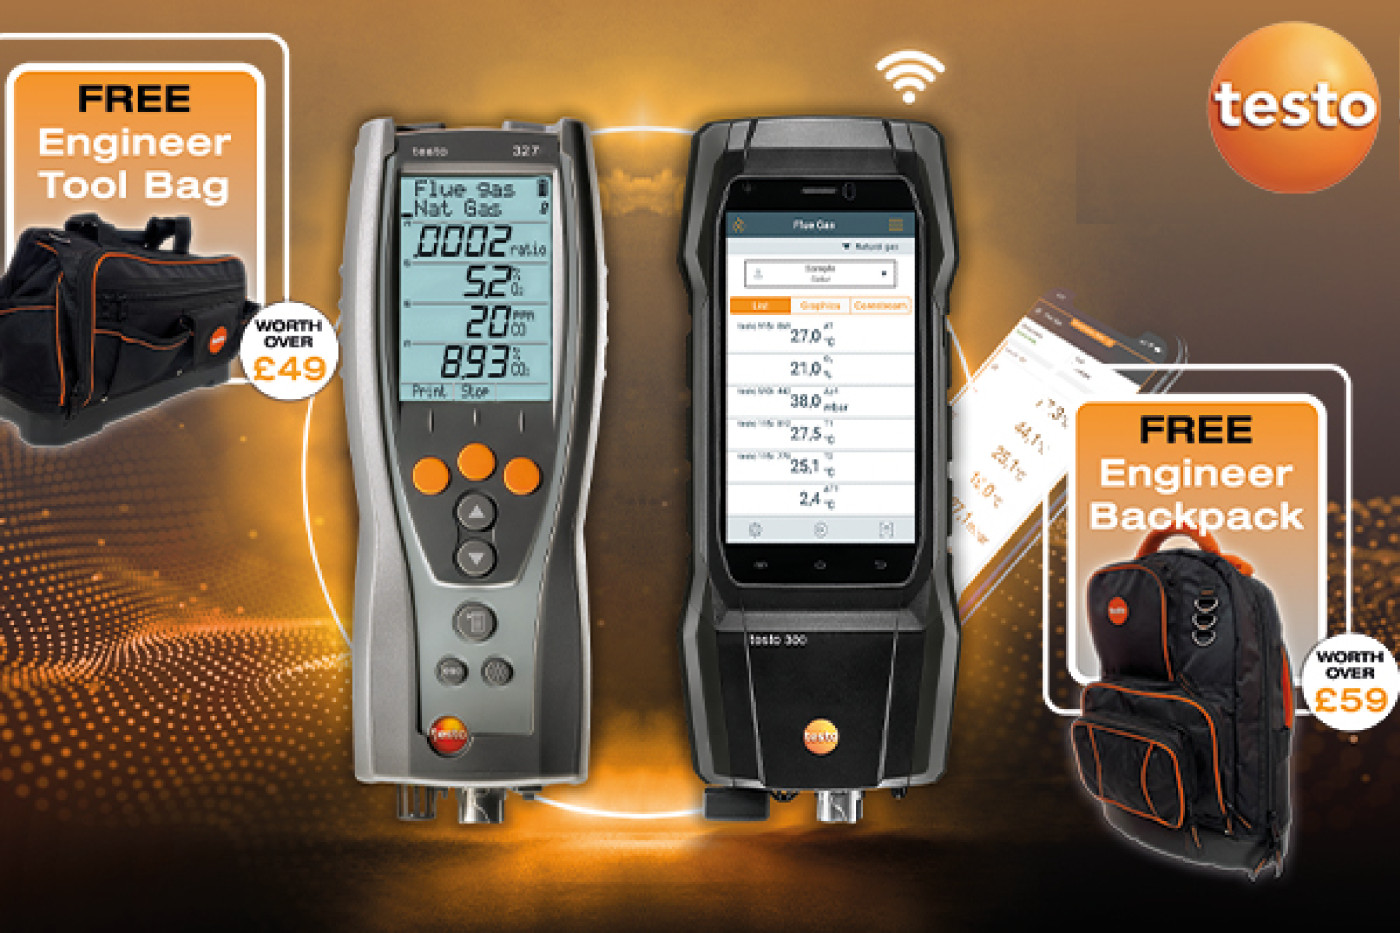 testo Autumn Flue Gas Analyser Offer • Receive a FREE engineer tool bag with select 300 and 327 analysers!